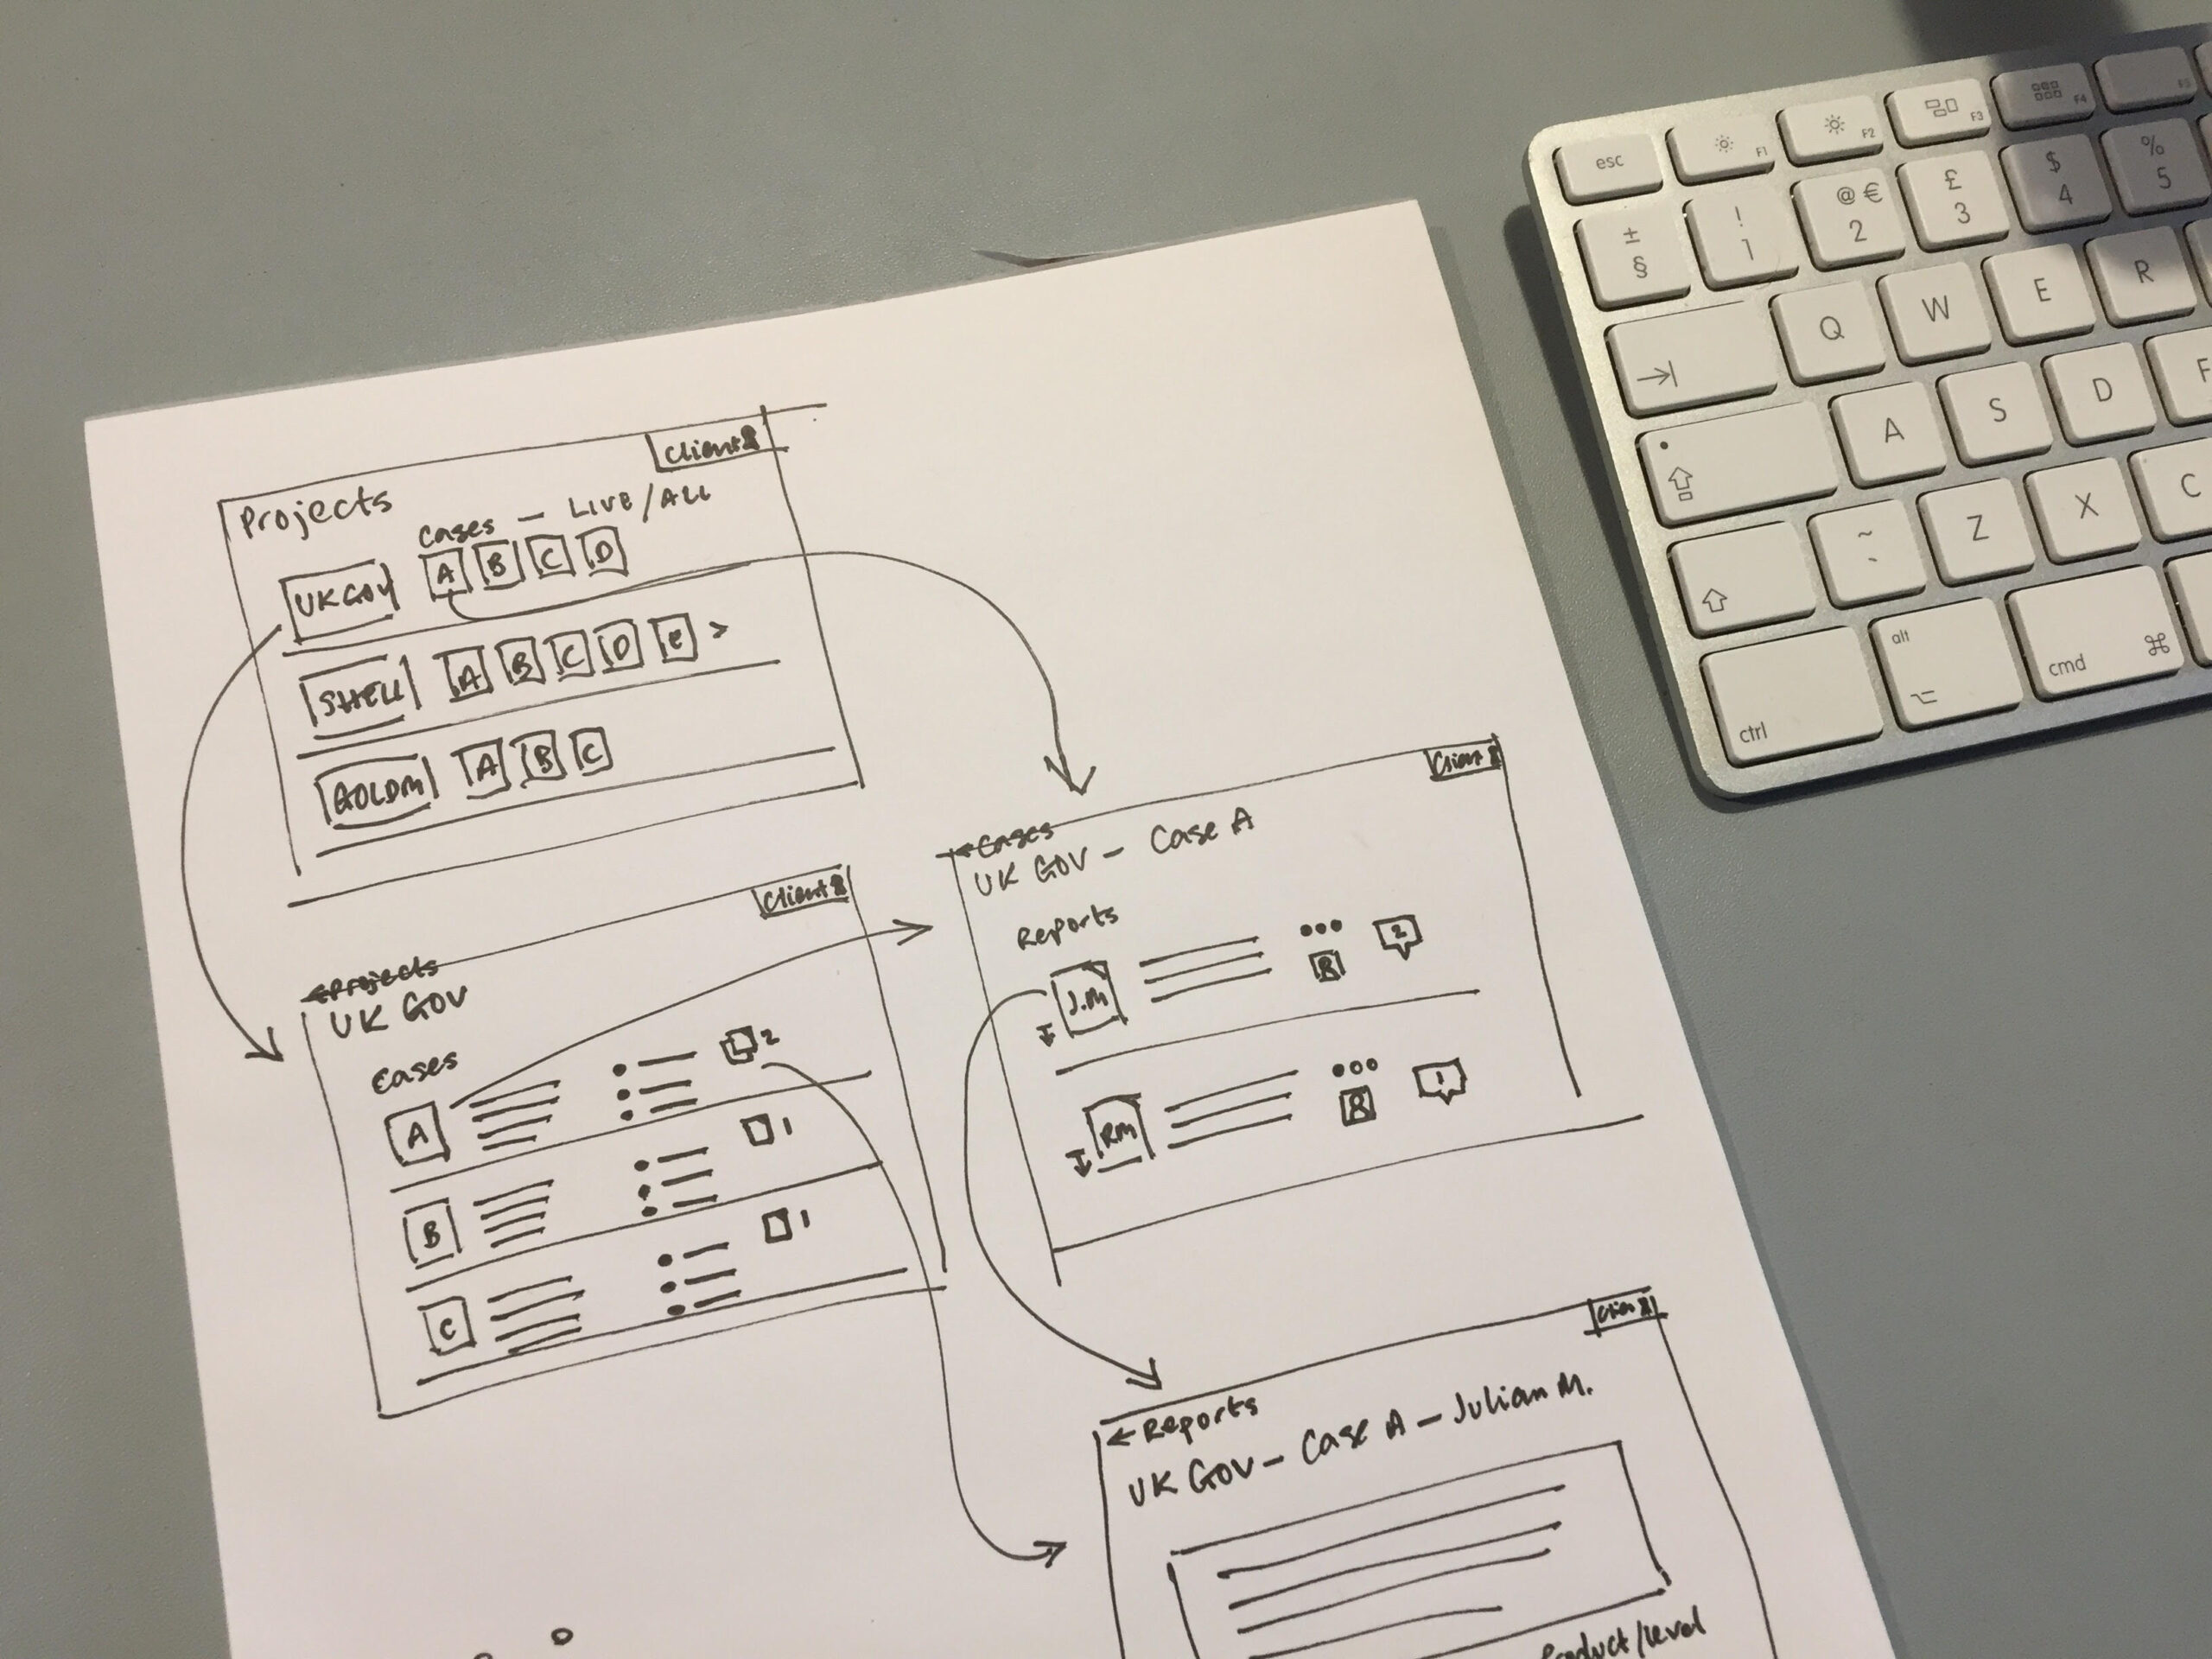 A loose wireframe of a website is sketched out on paper as part of a project brief